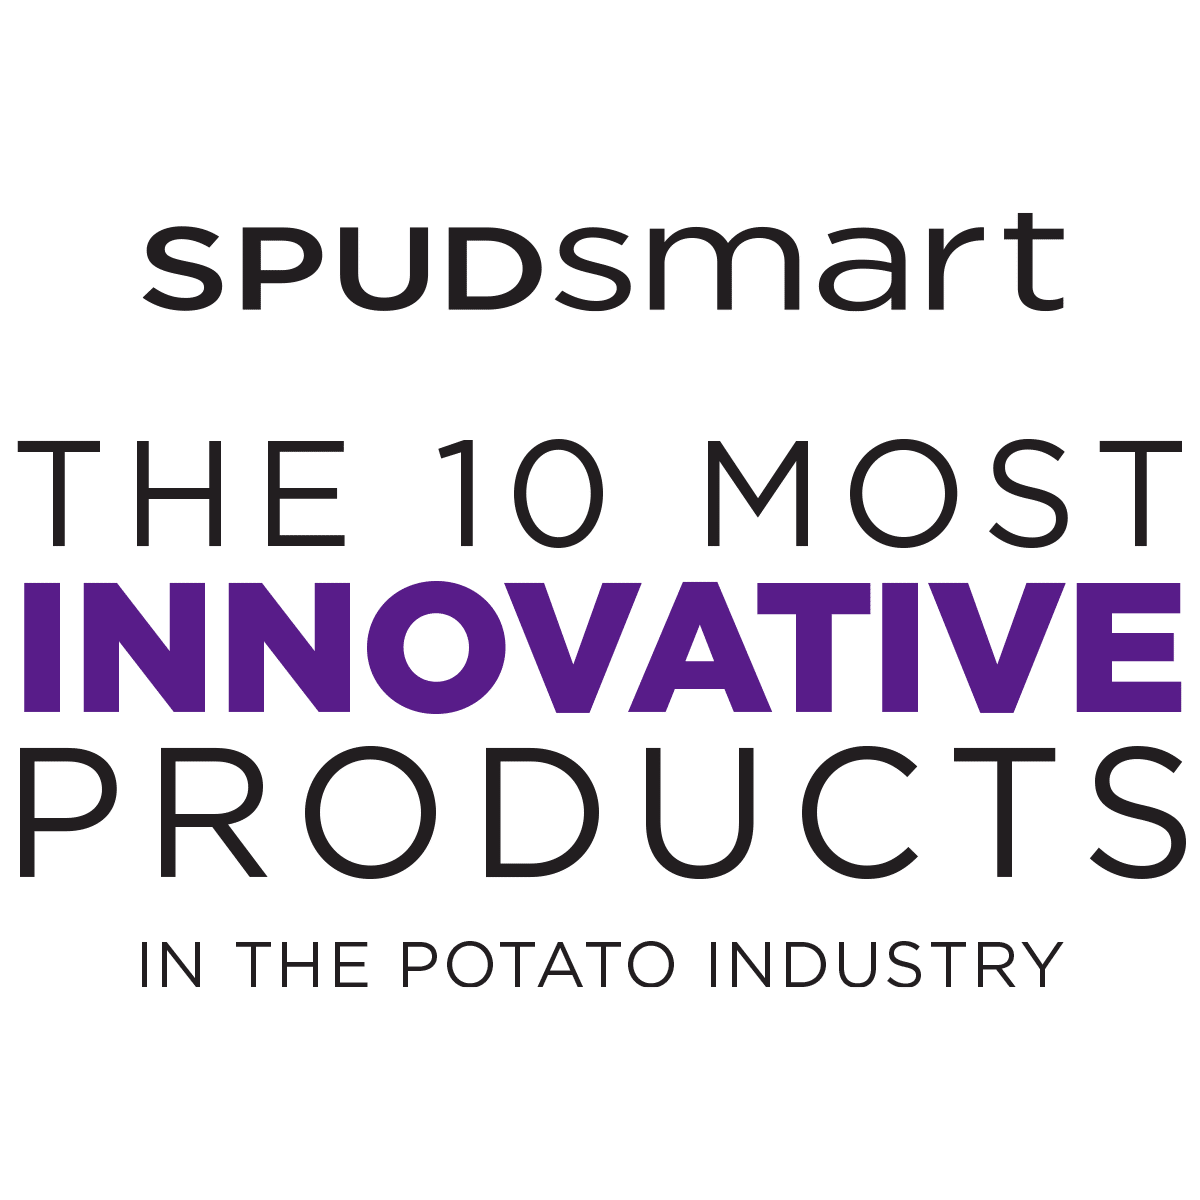 Spud Smart The 10 Most Innovative Products in the Potato Industry